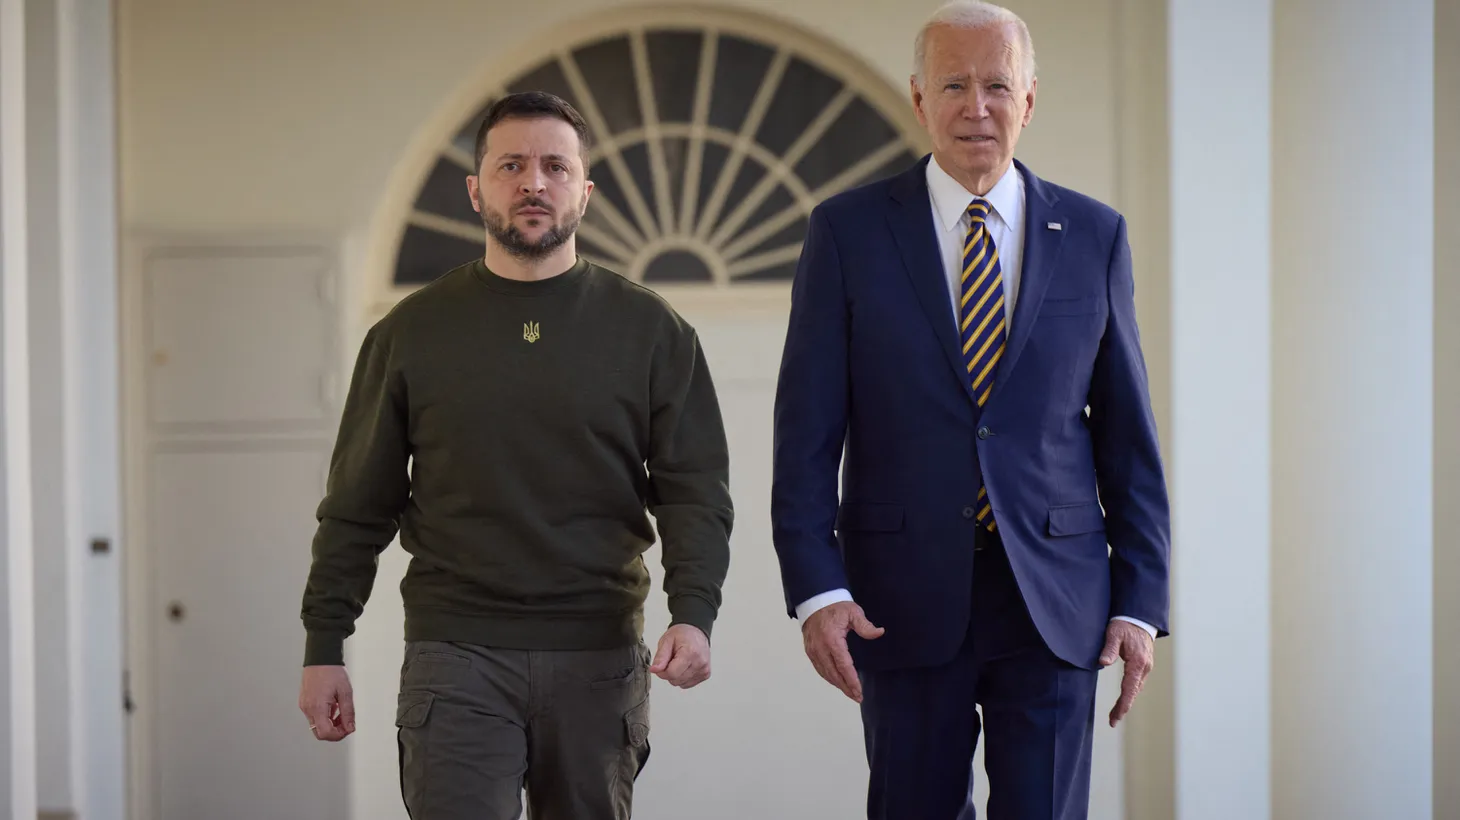 Handout photo shows President Joe Biden walking with Ukraine President Volodymyr Zelensky down the colonnade before meeting in the Oval Office of the White House, December 21, 2022 in Washington DC, USA.